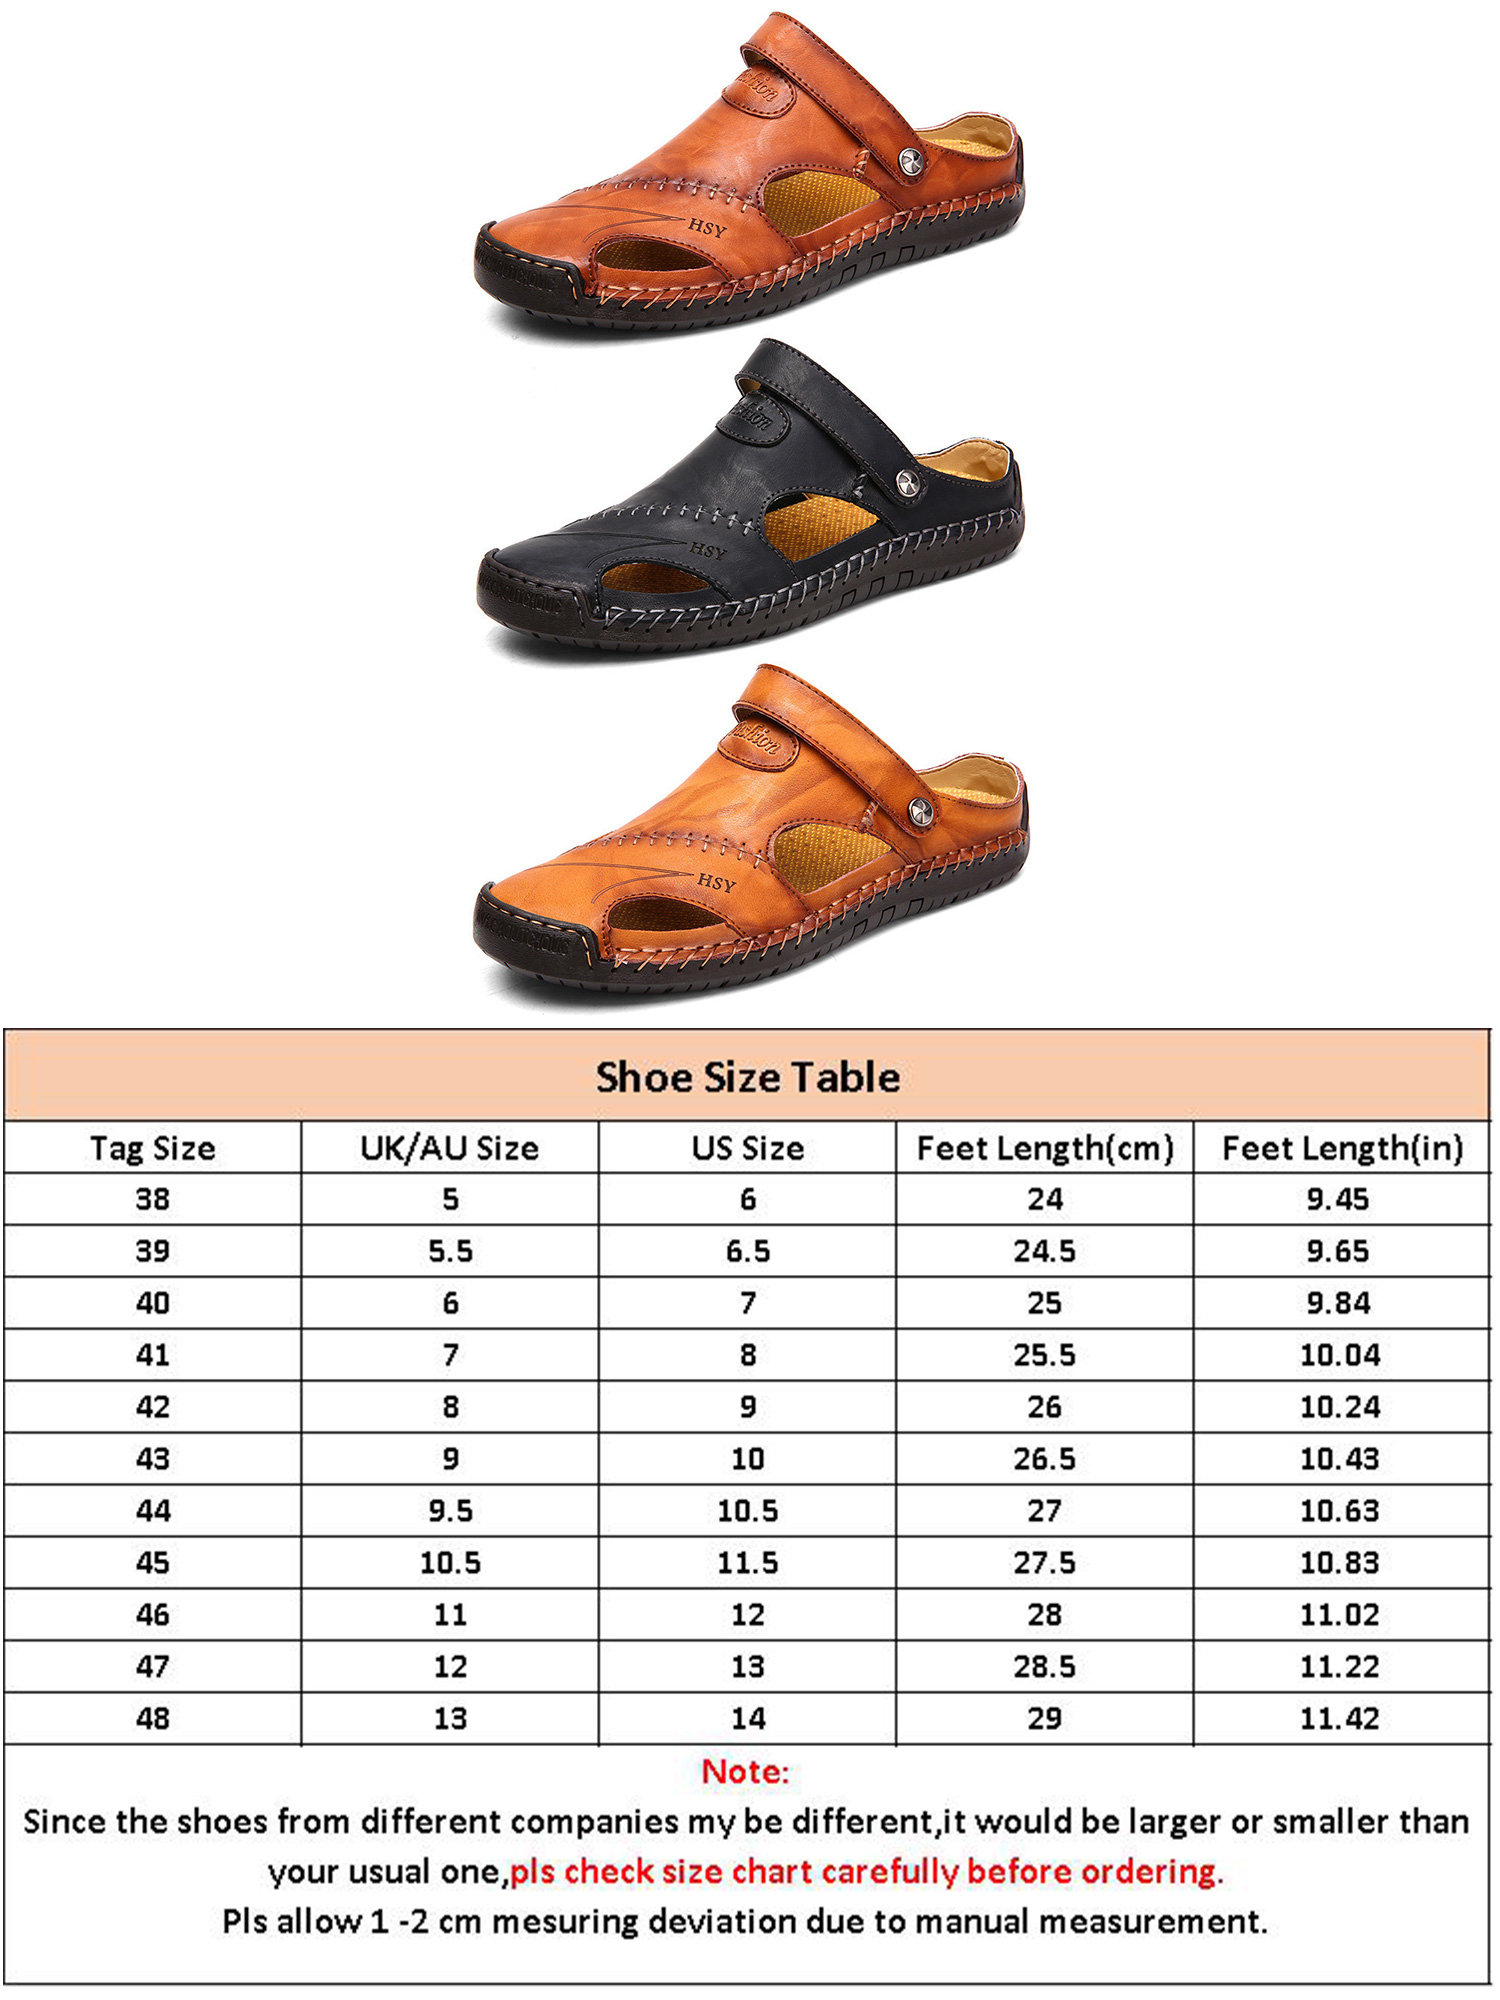 Frontwalk Mens Summer Sandals Casual Leather Shoes Outdoor Beach Breathable Casual Shoes - image 2 of 5